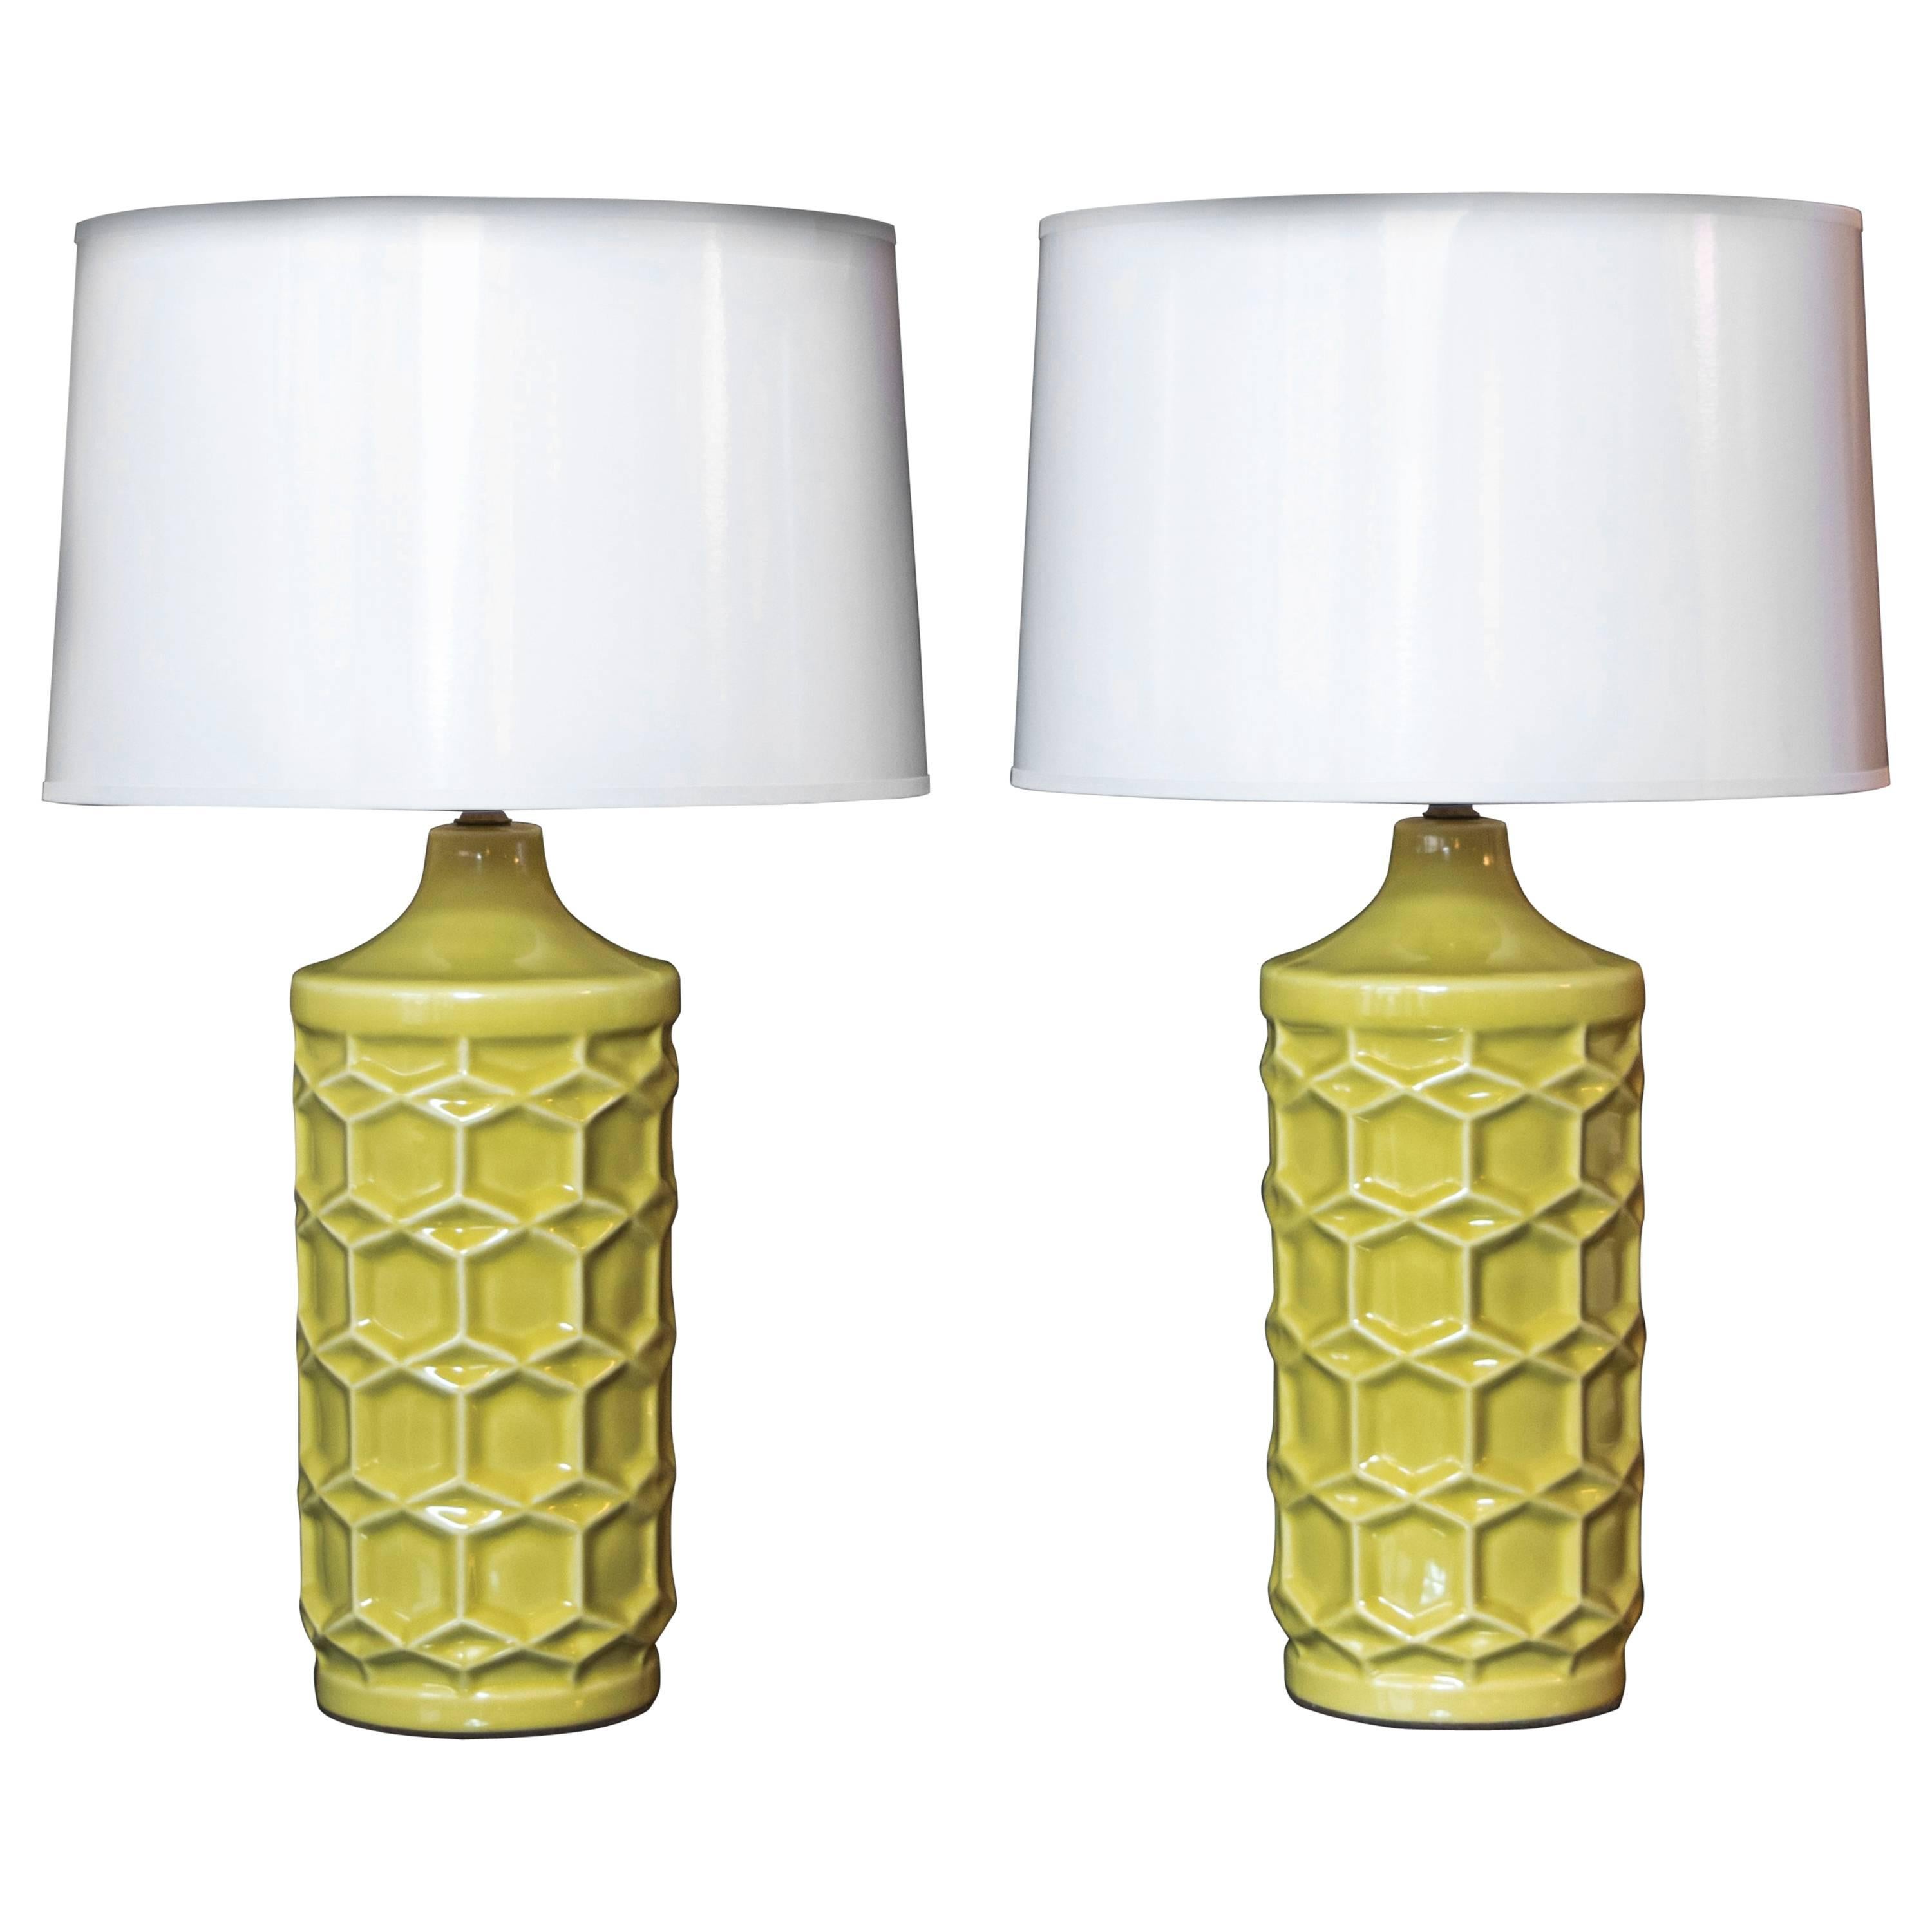 Pair of Yellow Ceramic Honeycomb Lamps For Sale